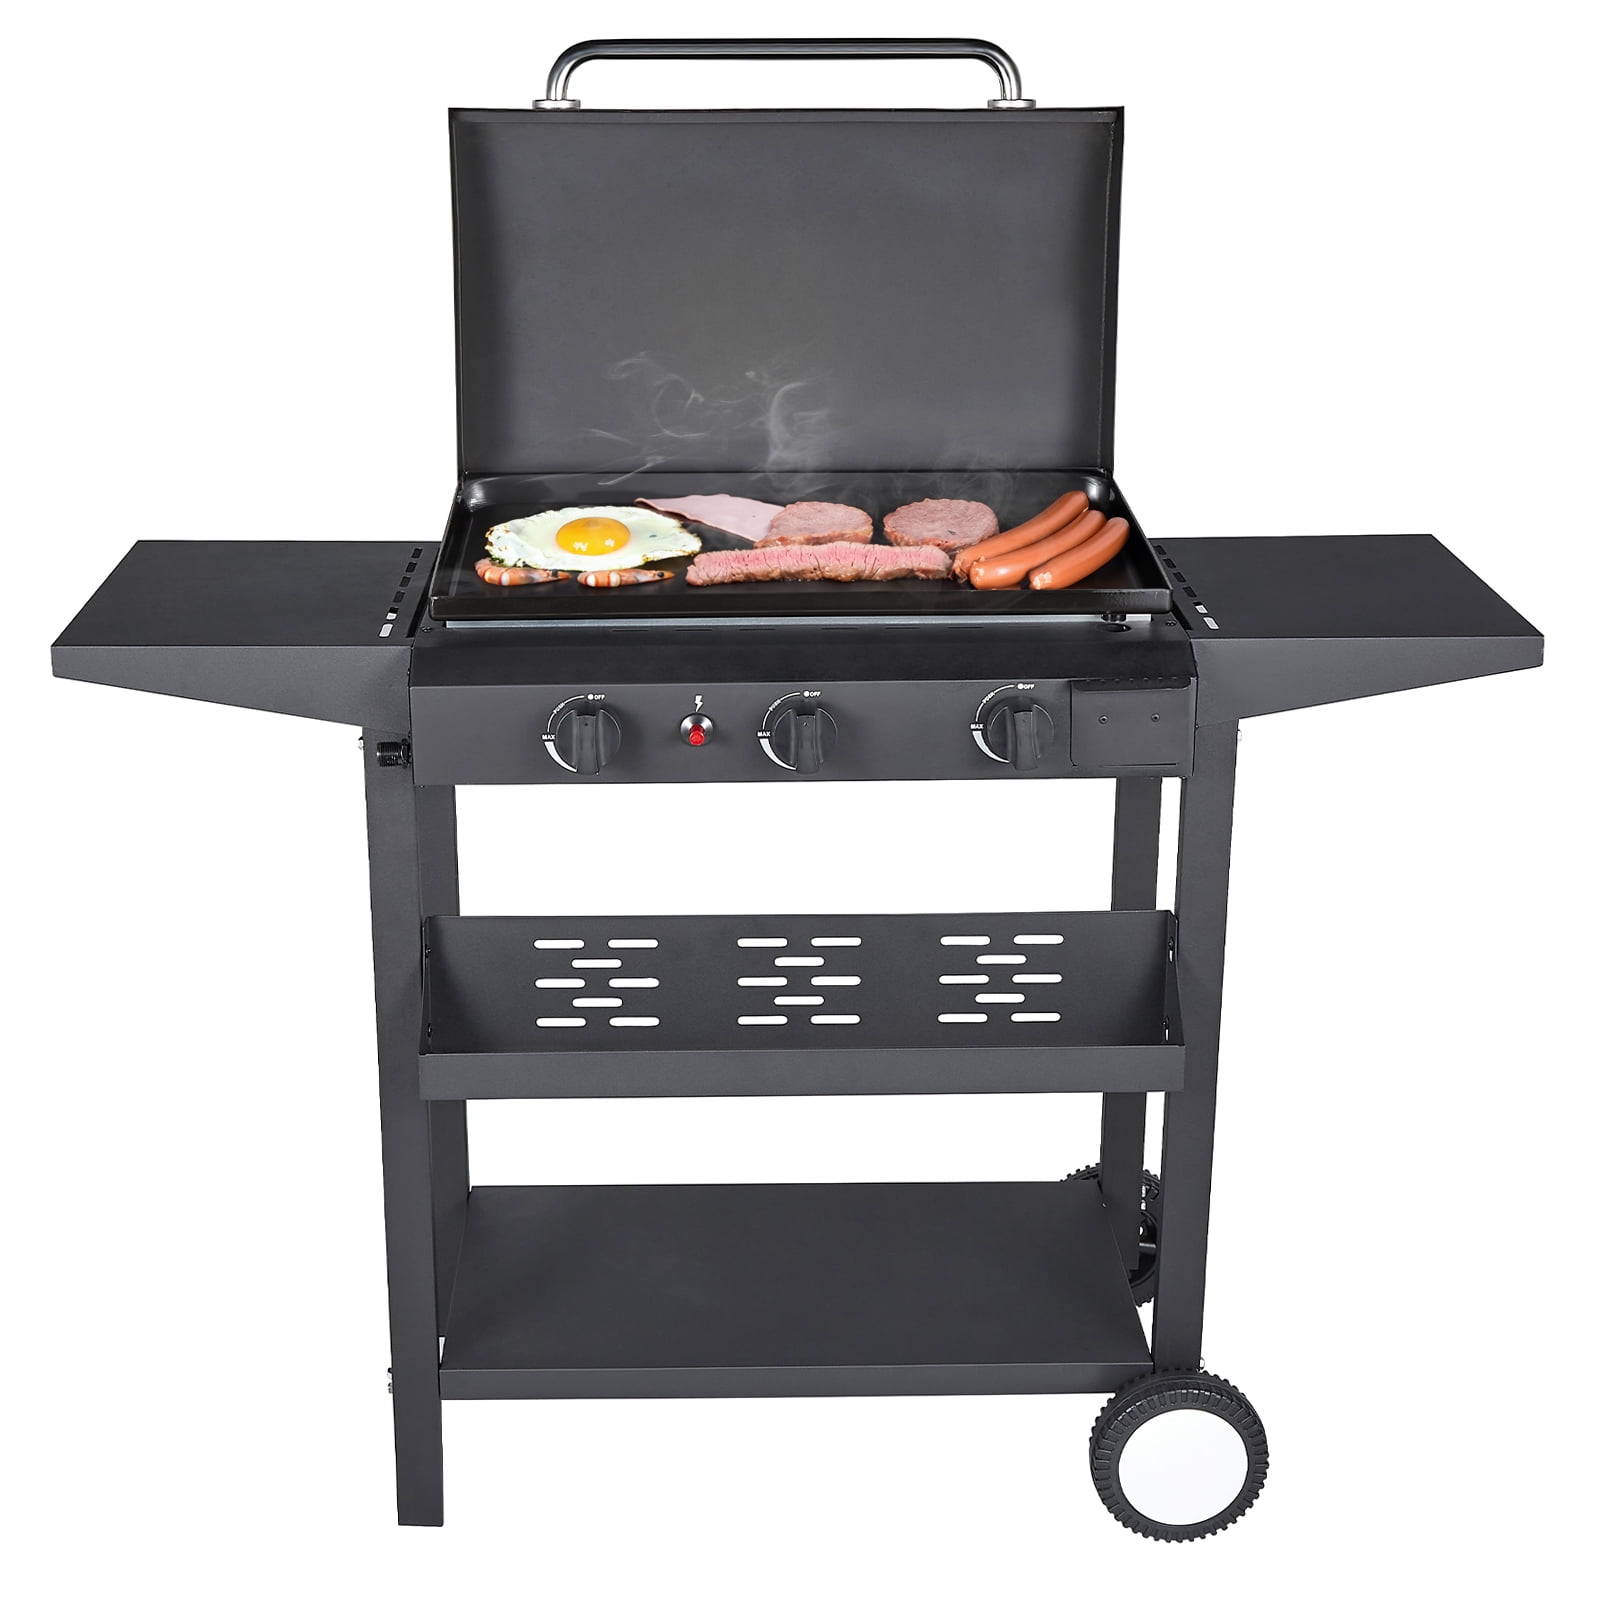 SUGIFT 3 Burner BBQ Propane Gas Grill, Stainless Steel 24,500 BTU Patio  Garden Griddle Cooking Station with Side Shelves 